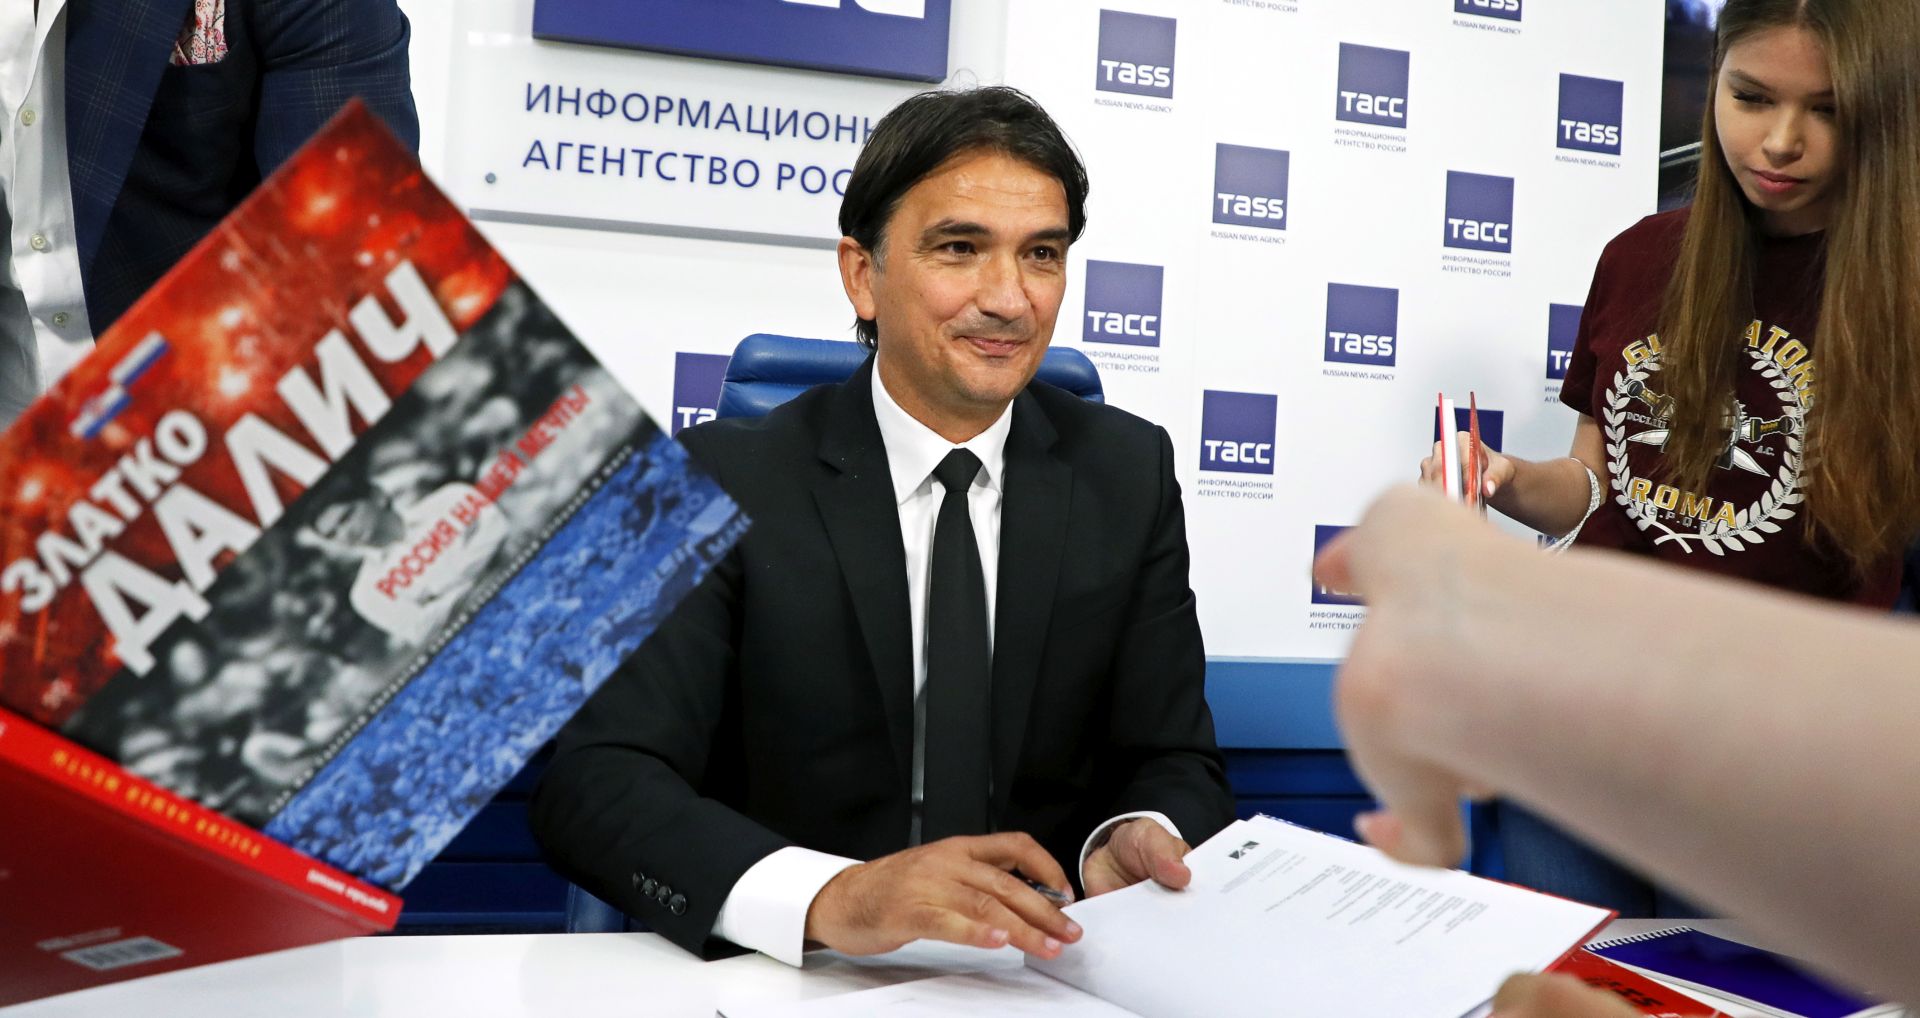 epa07647468 Croatian national soccer team head coach Zlatko Dalic signs books during the presentation of his book 'Russia of Our Dreams' on the FIFA World Cup 2018 in Moscow, Russia, 14 June 2019.  EPA/YURI KOCHETKOV